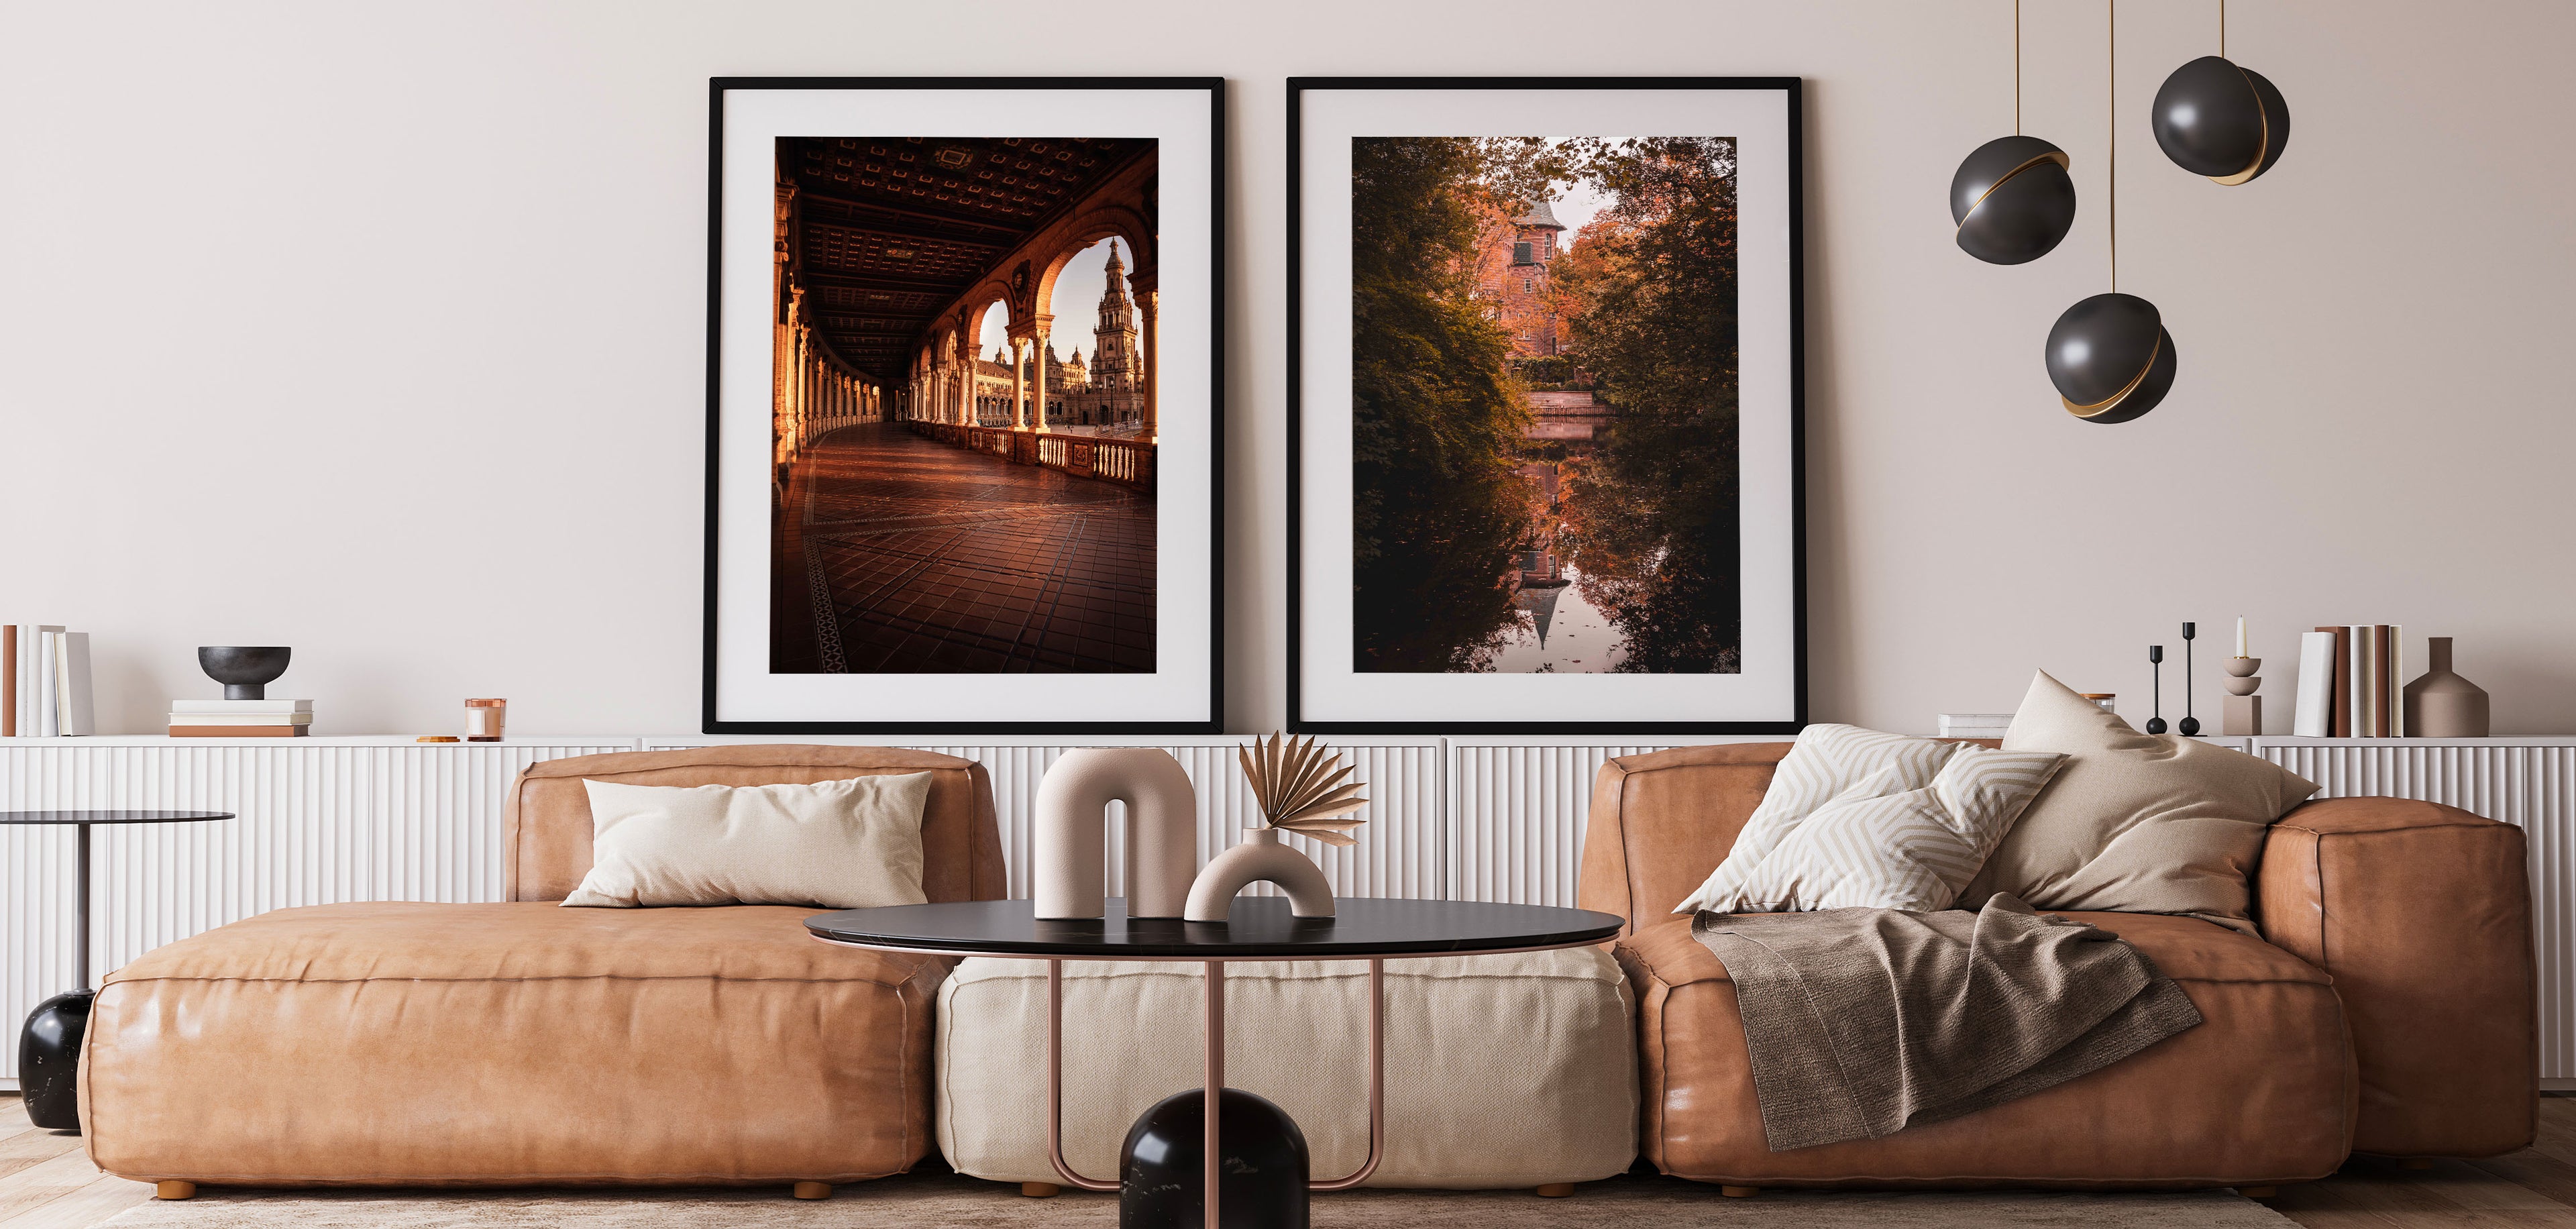 Showcasing two big pieces of wall art featuring photography artworks intended for home decoration in a setting of a modern living room